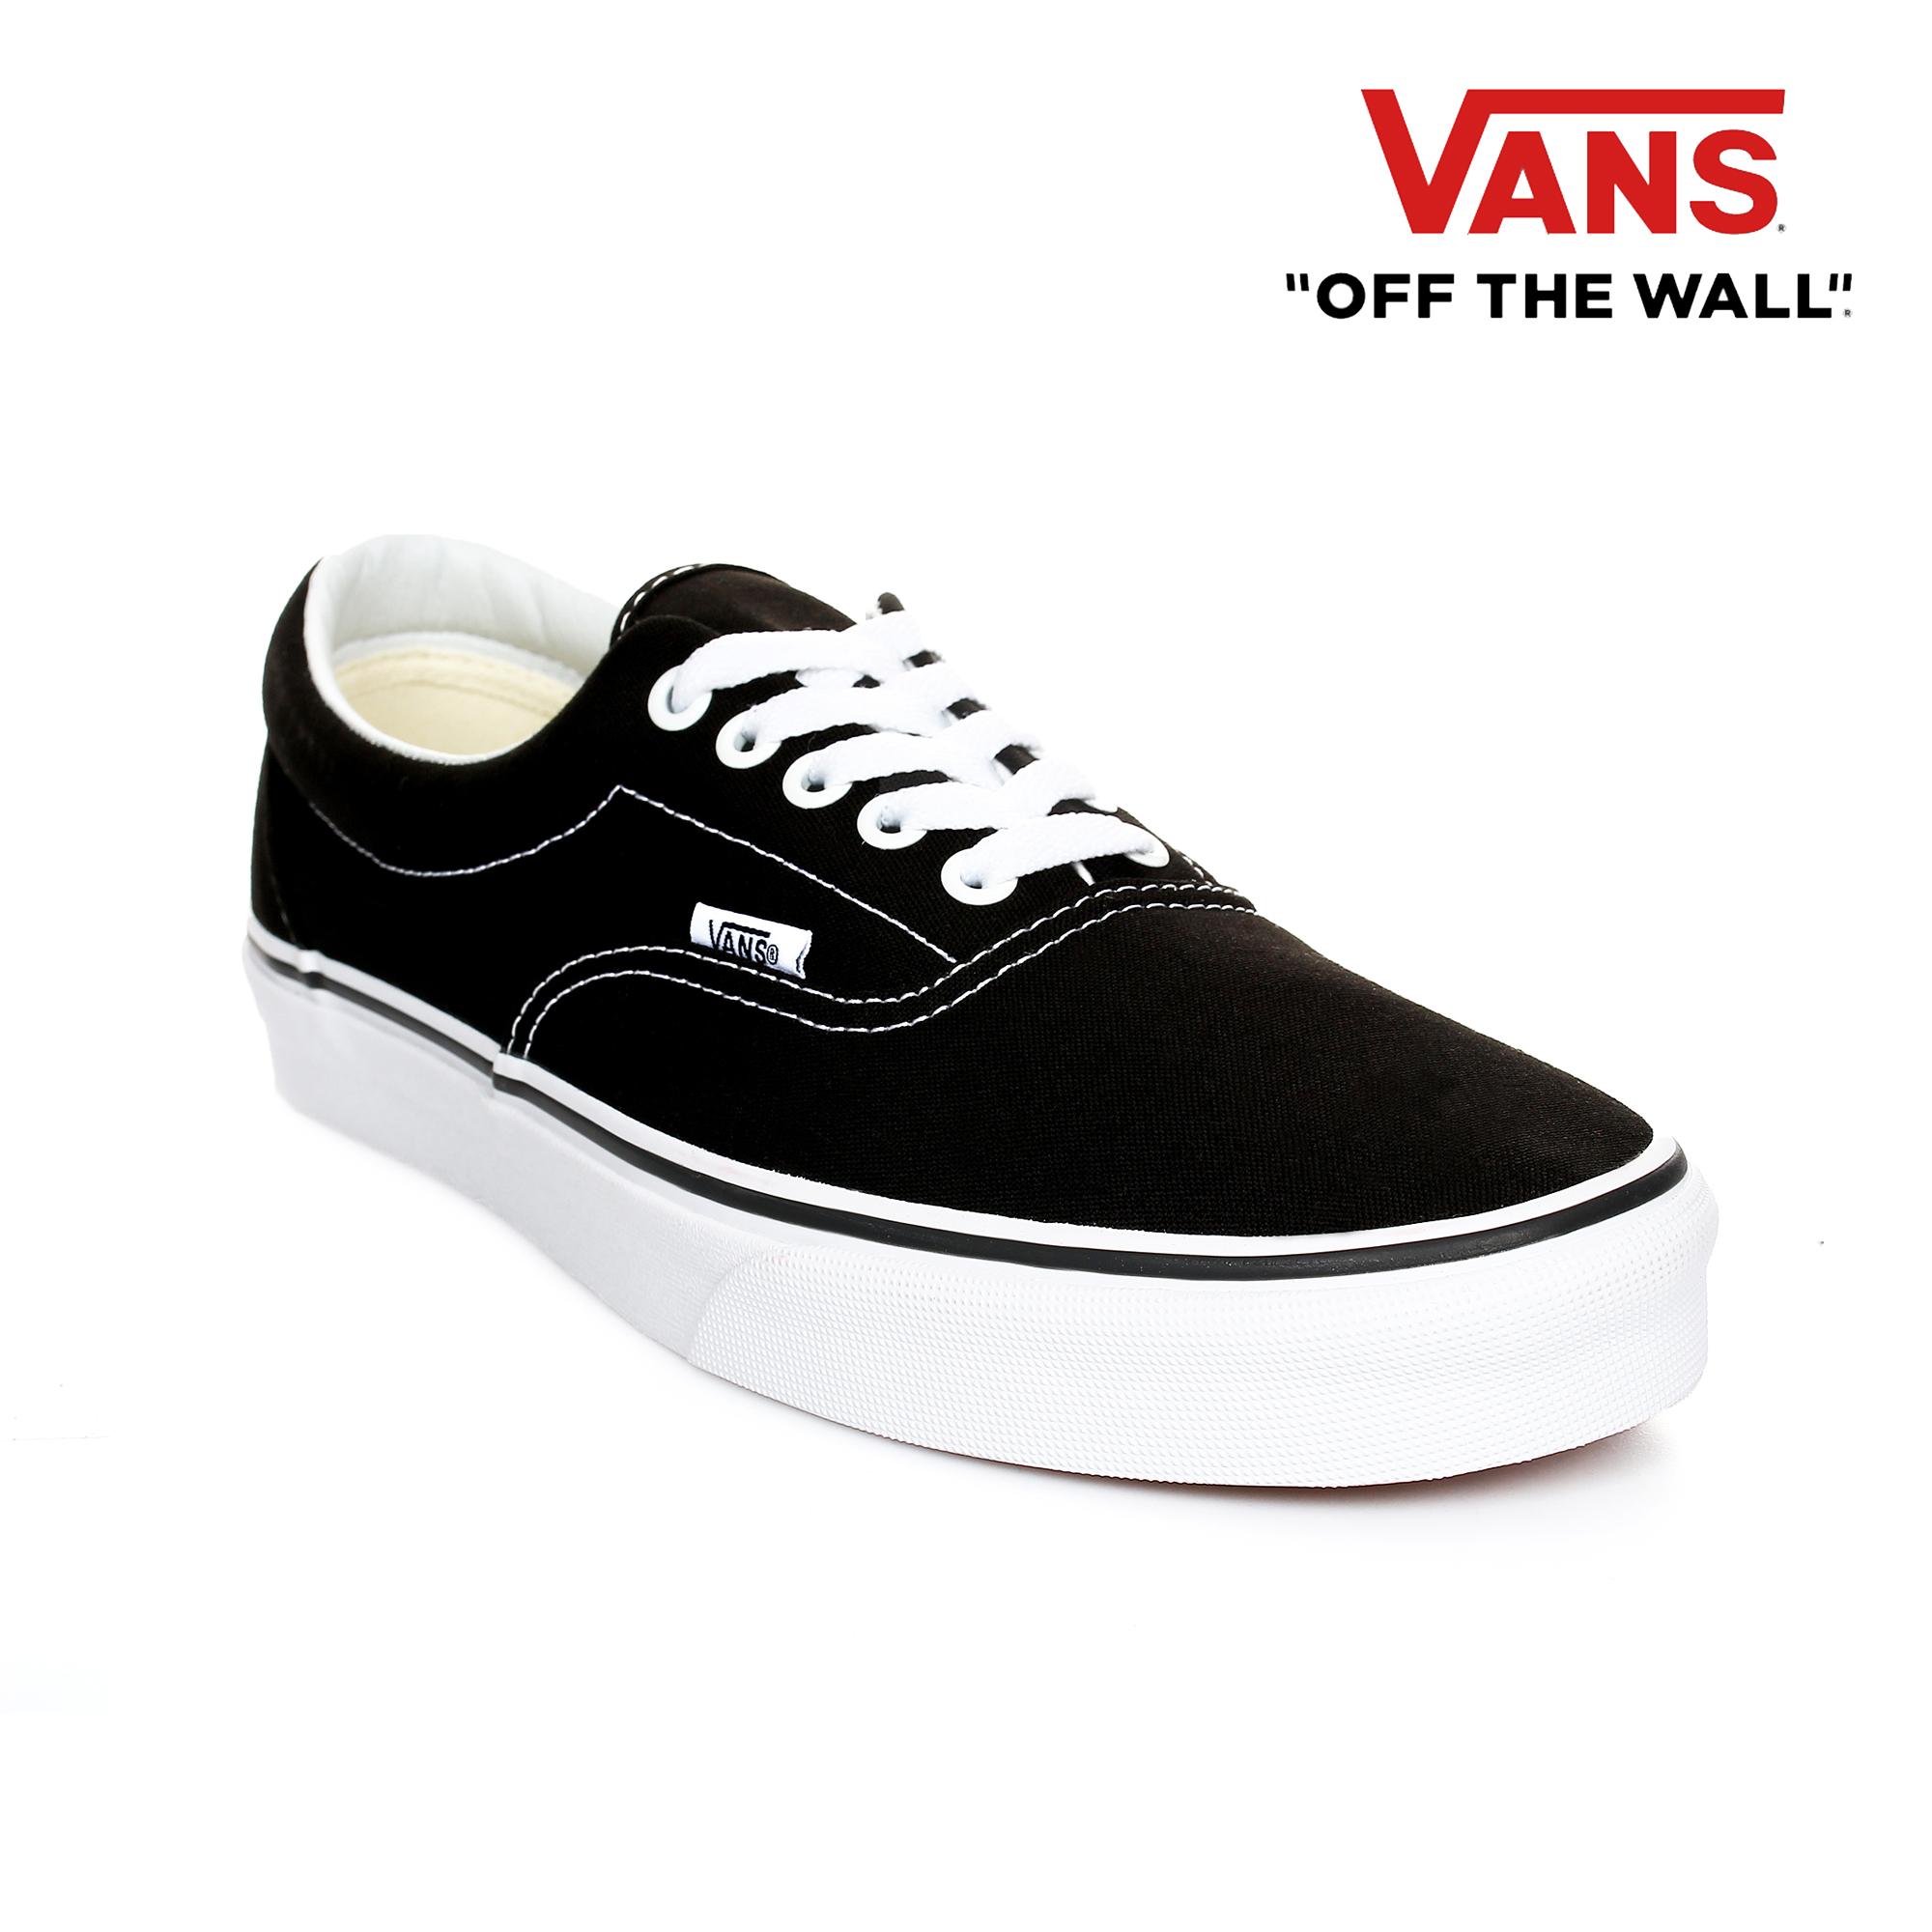 vans shoes price at sm - 51% remise 